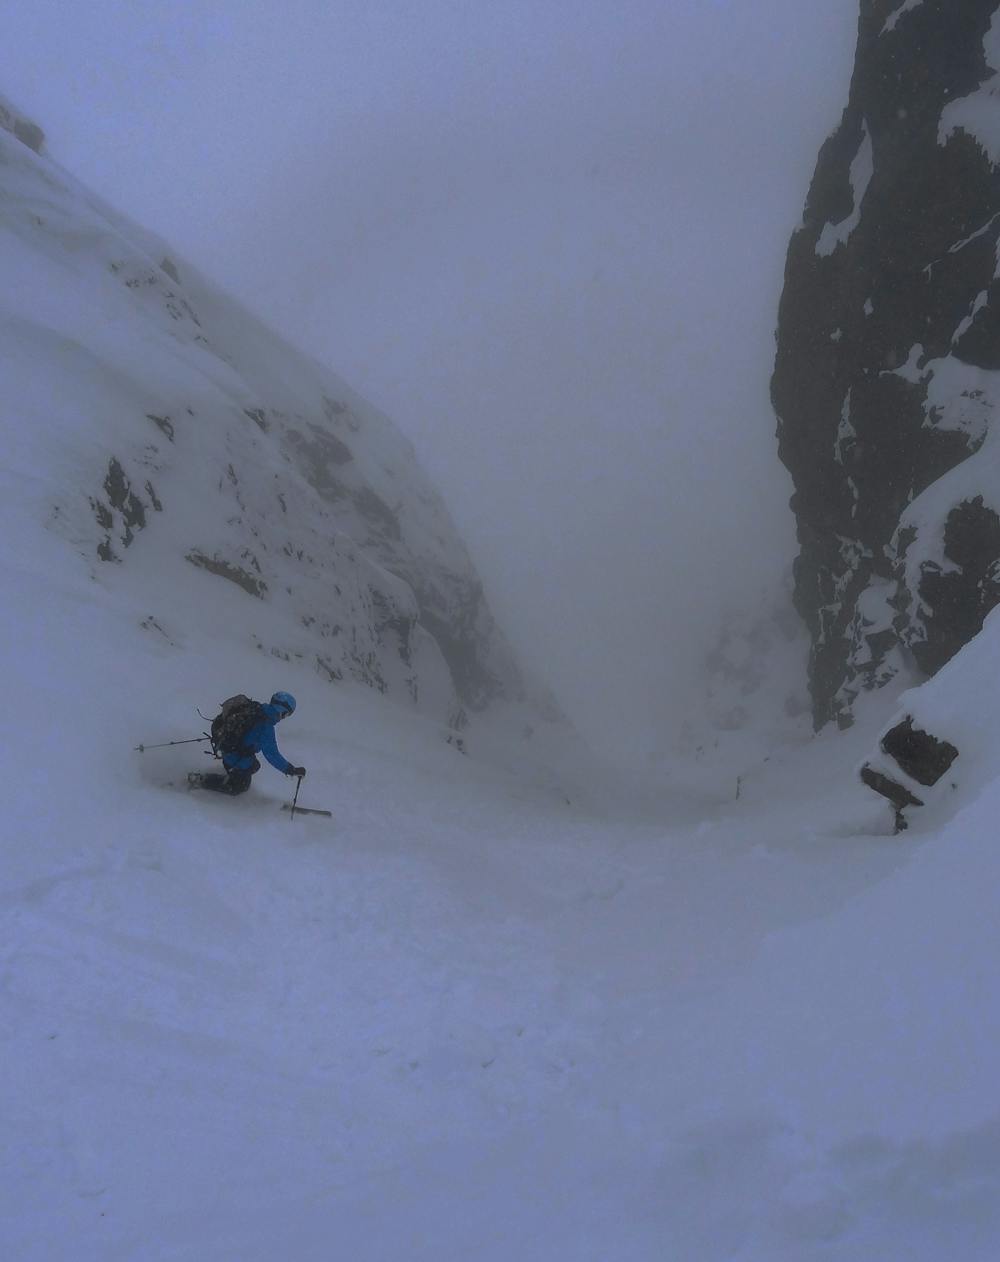 Dropping into the couloir in atmospheric conditions